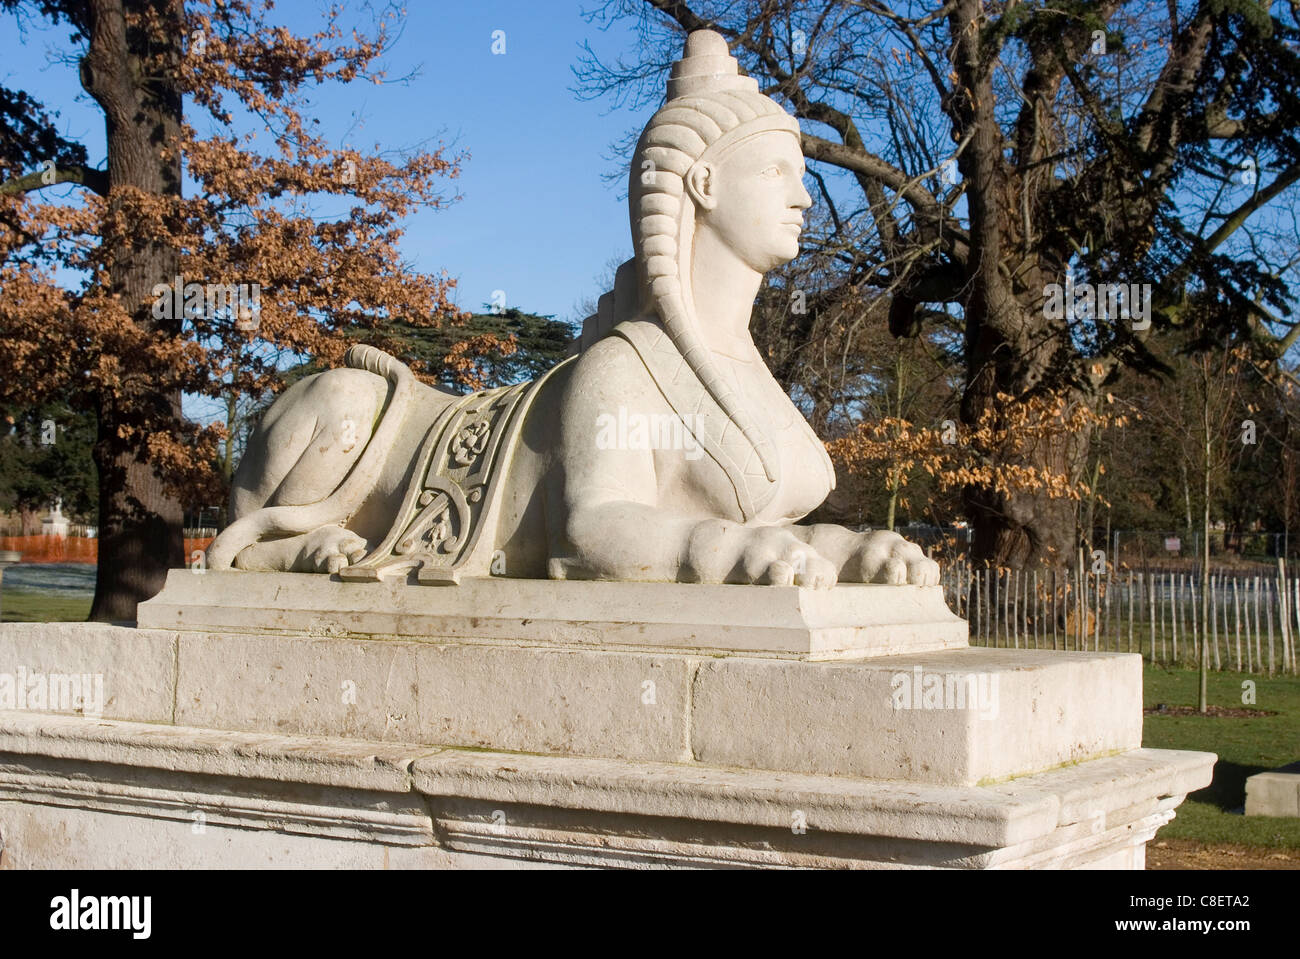 Sphinx as part of house decorations near Chiswick House, Chiswick Gardens and Park, Chiswick, London, England, United Kingdom Stock Photo